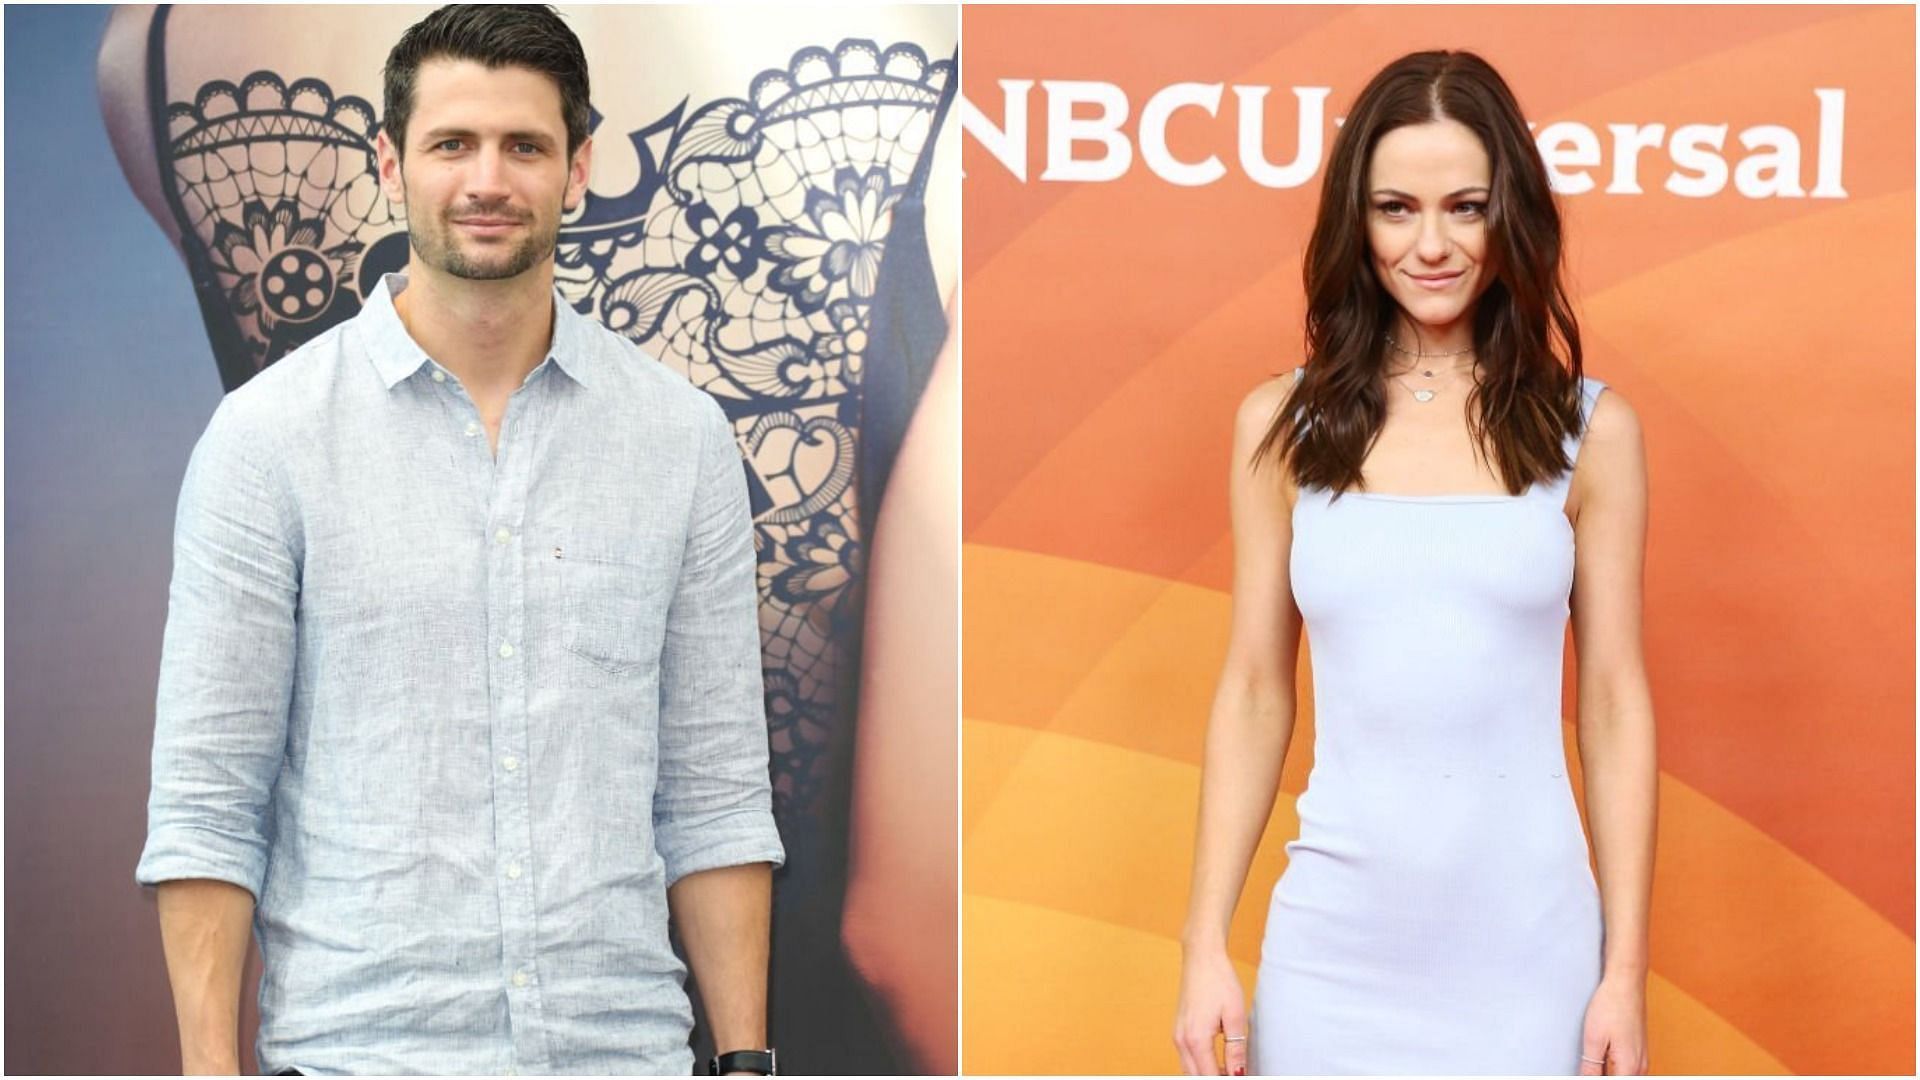 James Lafferty and Alexandra Park have recently tied the knot (Images via Toni Anne Barson and Michael Tran/Getty Images)